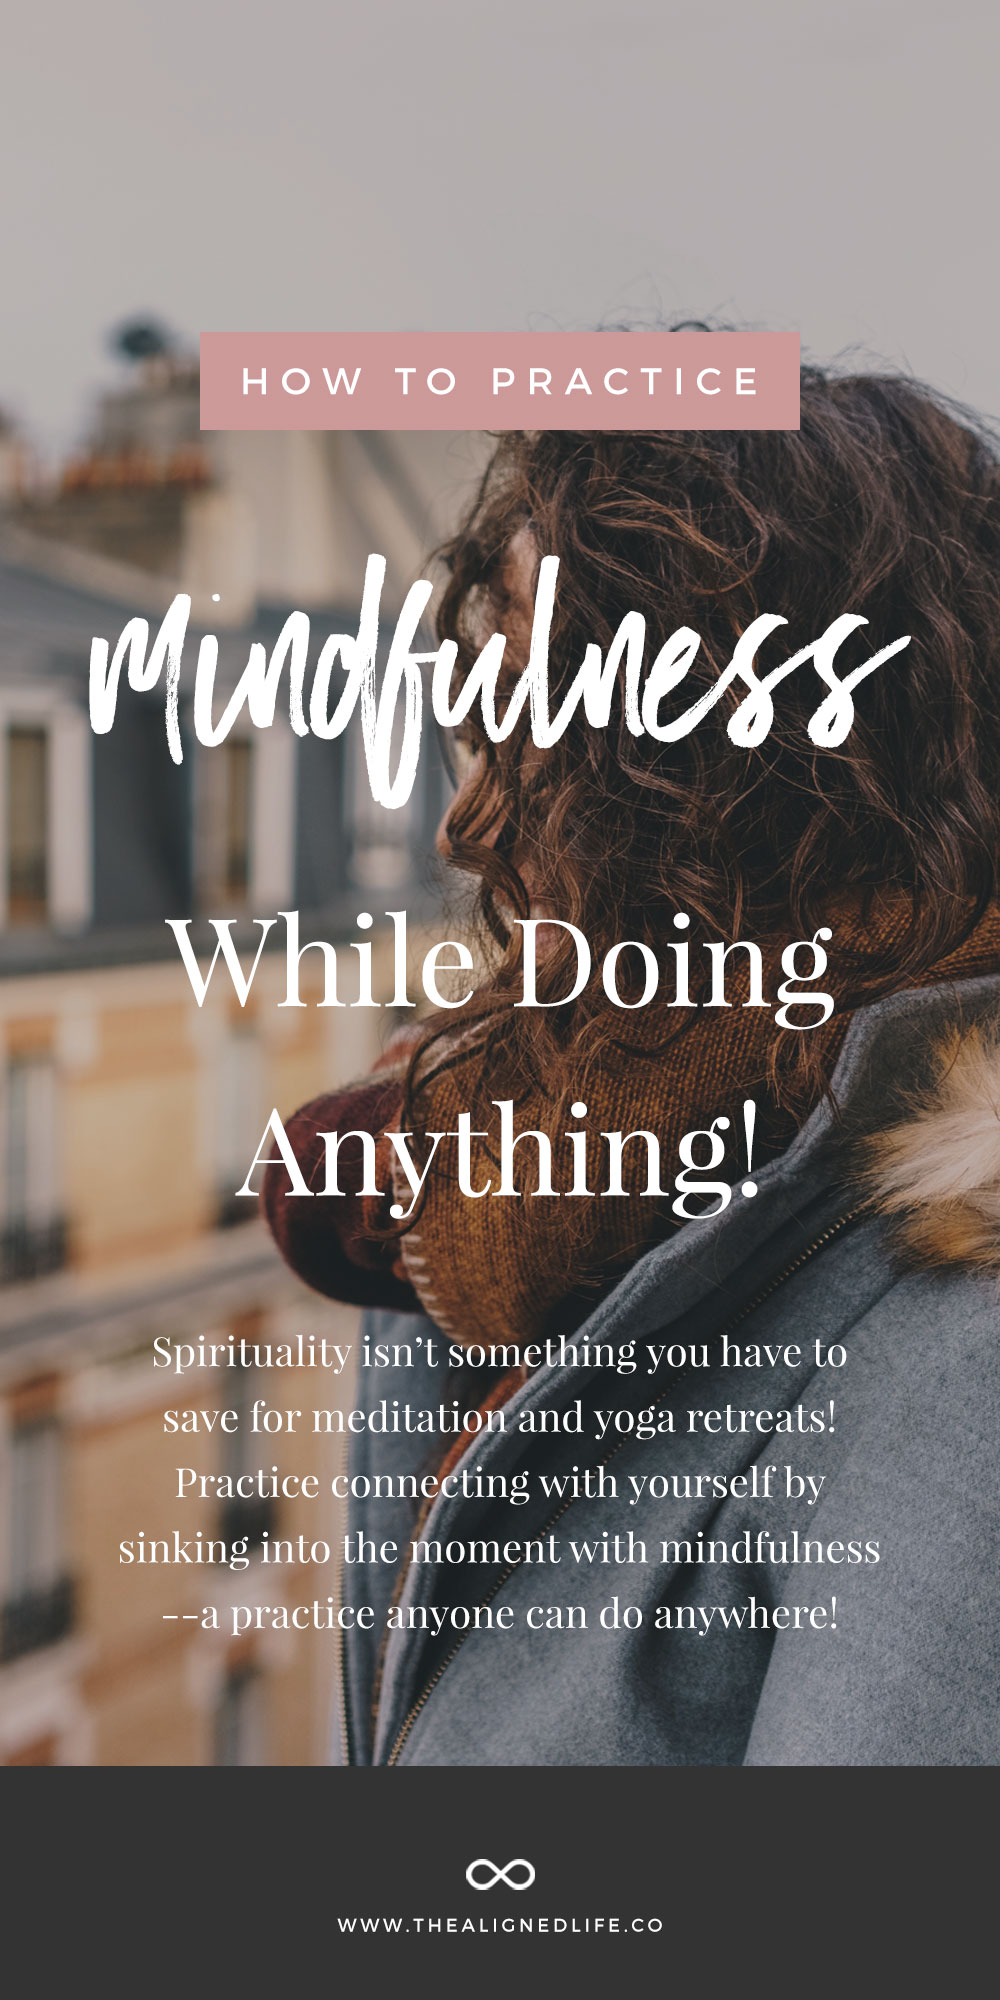 How To Practice Mindfulness While Doing Anything